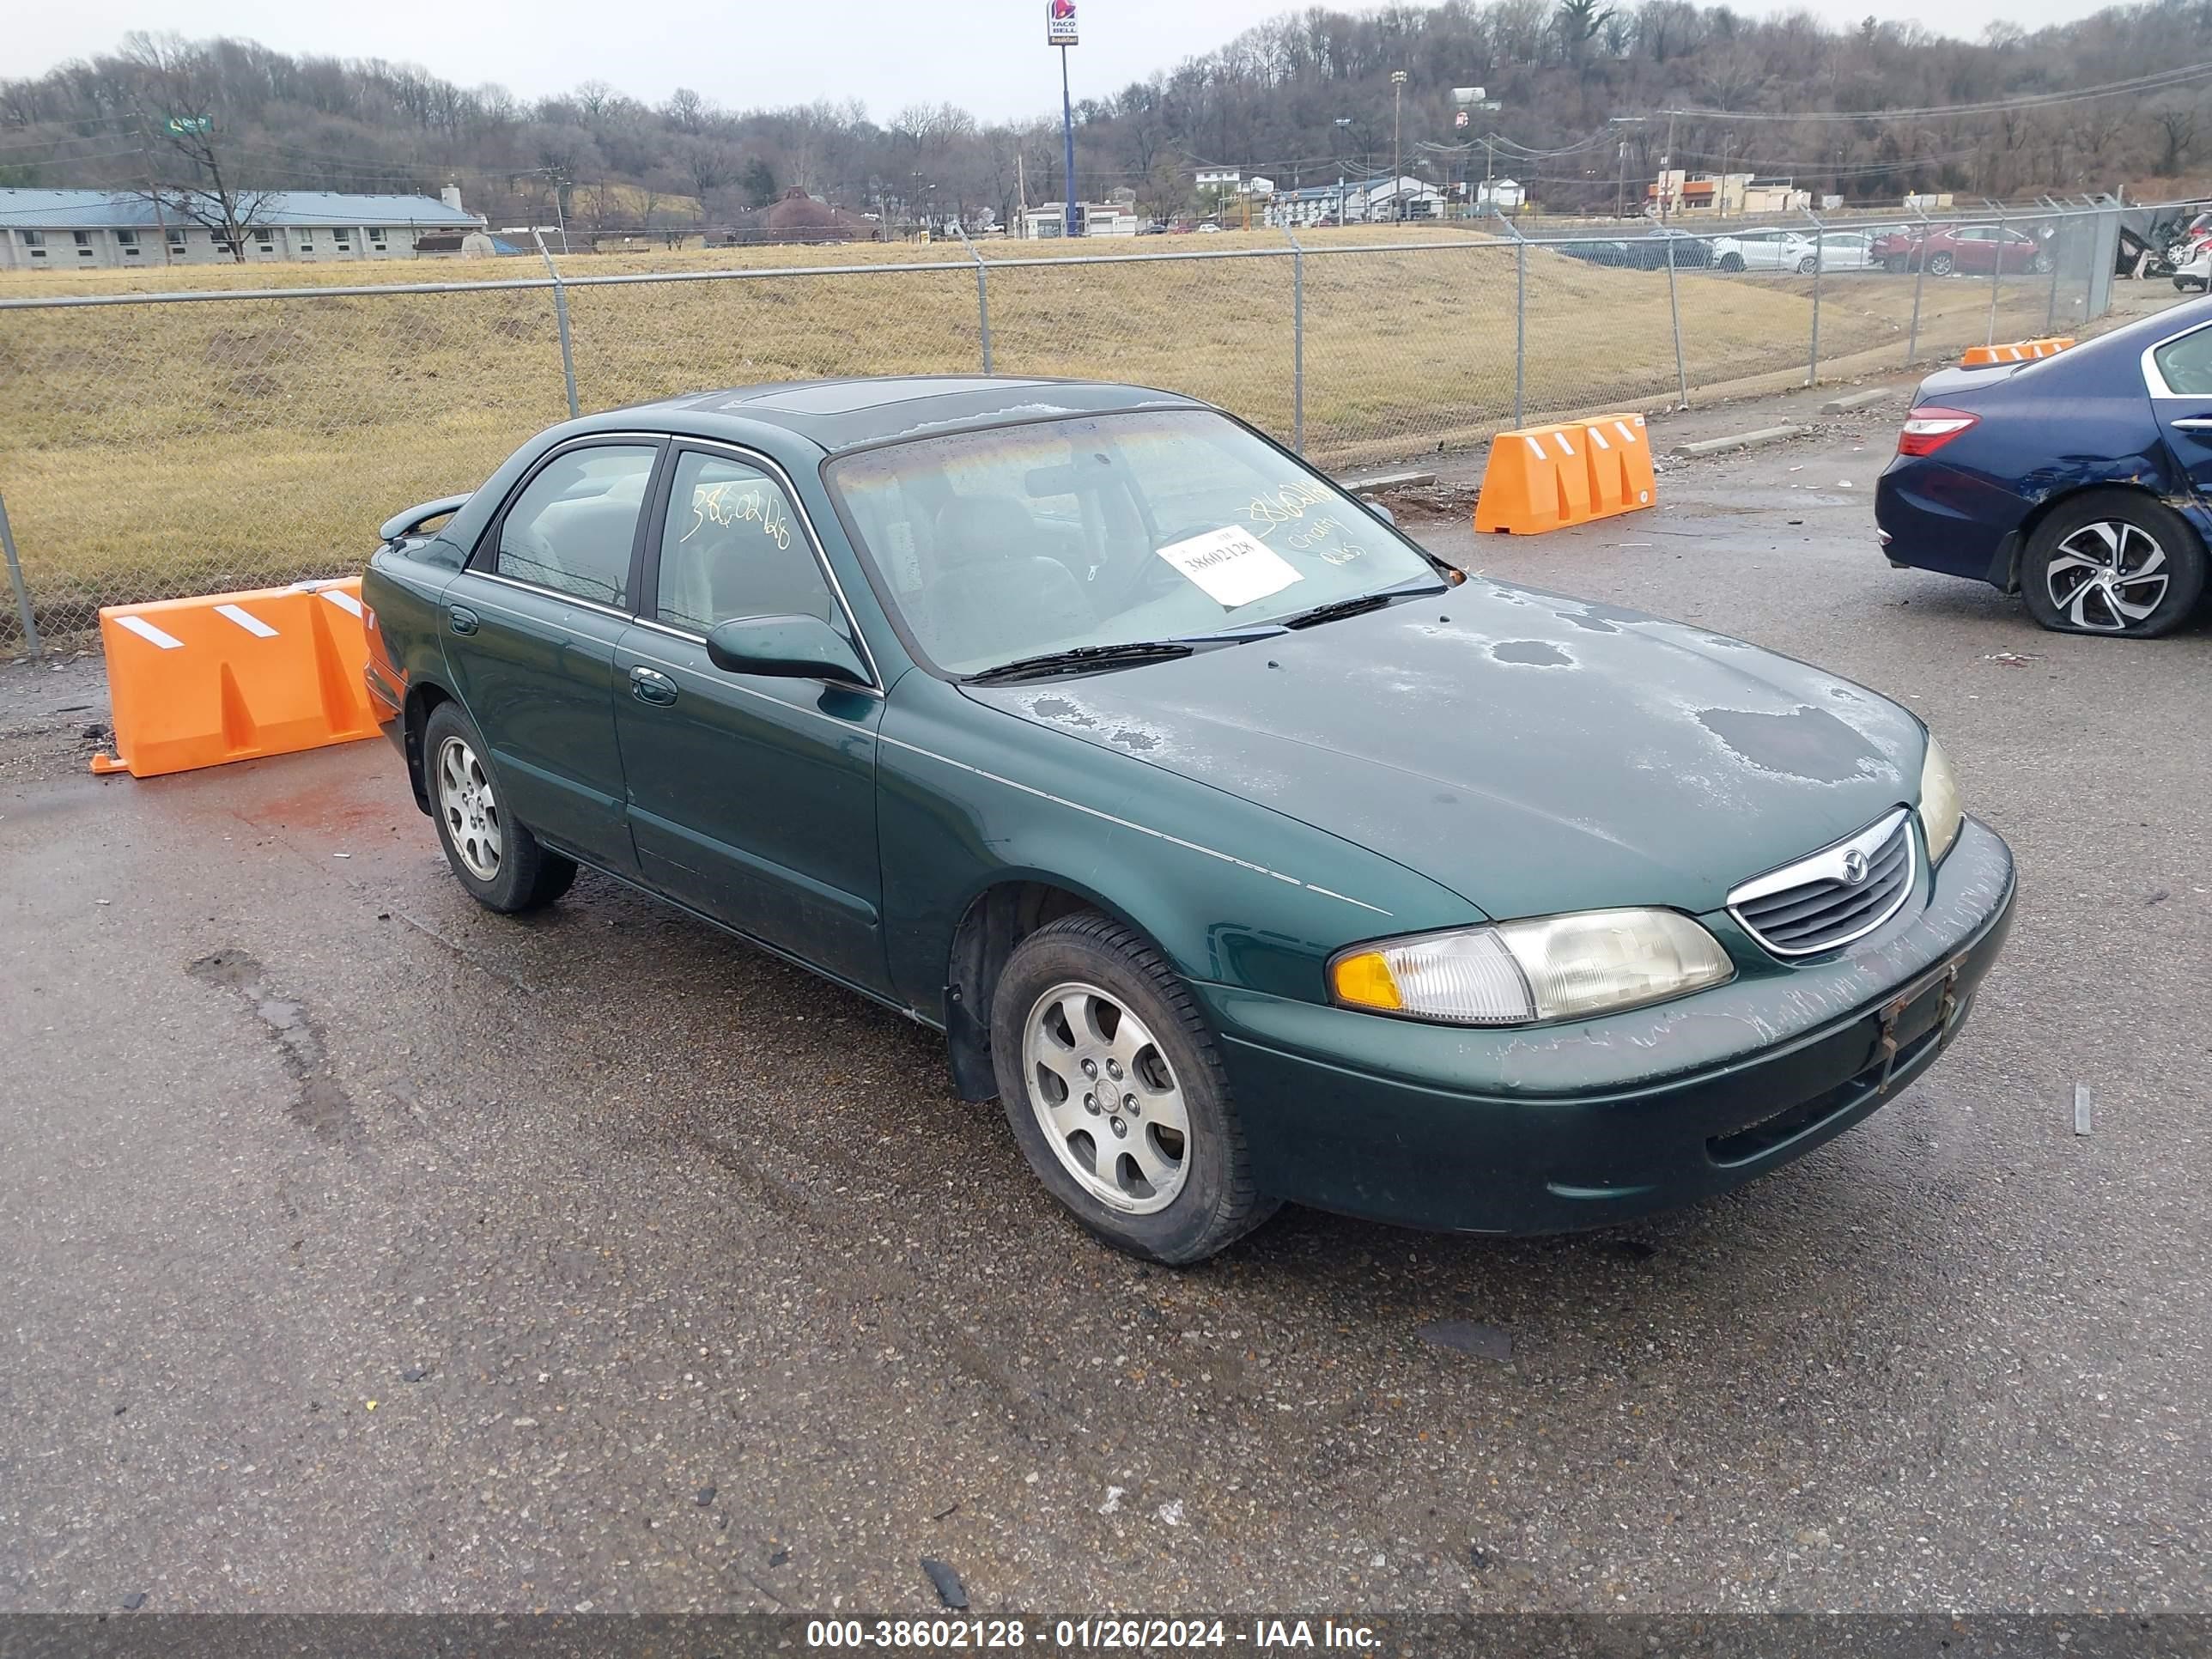 vin: 1YVGF22D7W5696712 1YVGF22D7W5696712 1998 mazda 626 2500 for Sale in 62232, 2436 Old Country Inn Dr, Caseyville, Illinois, USA